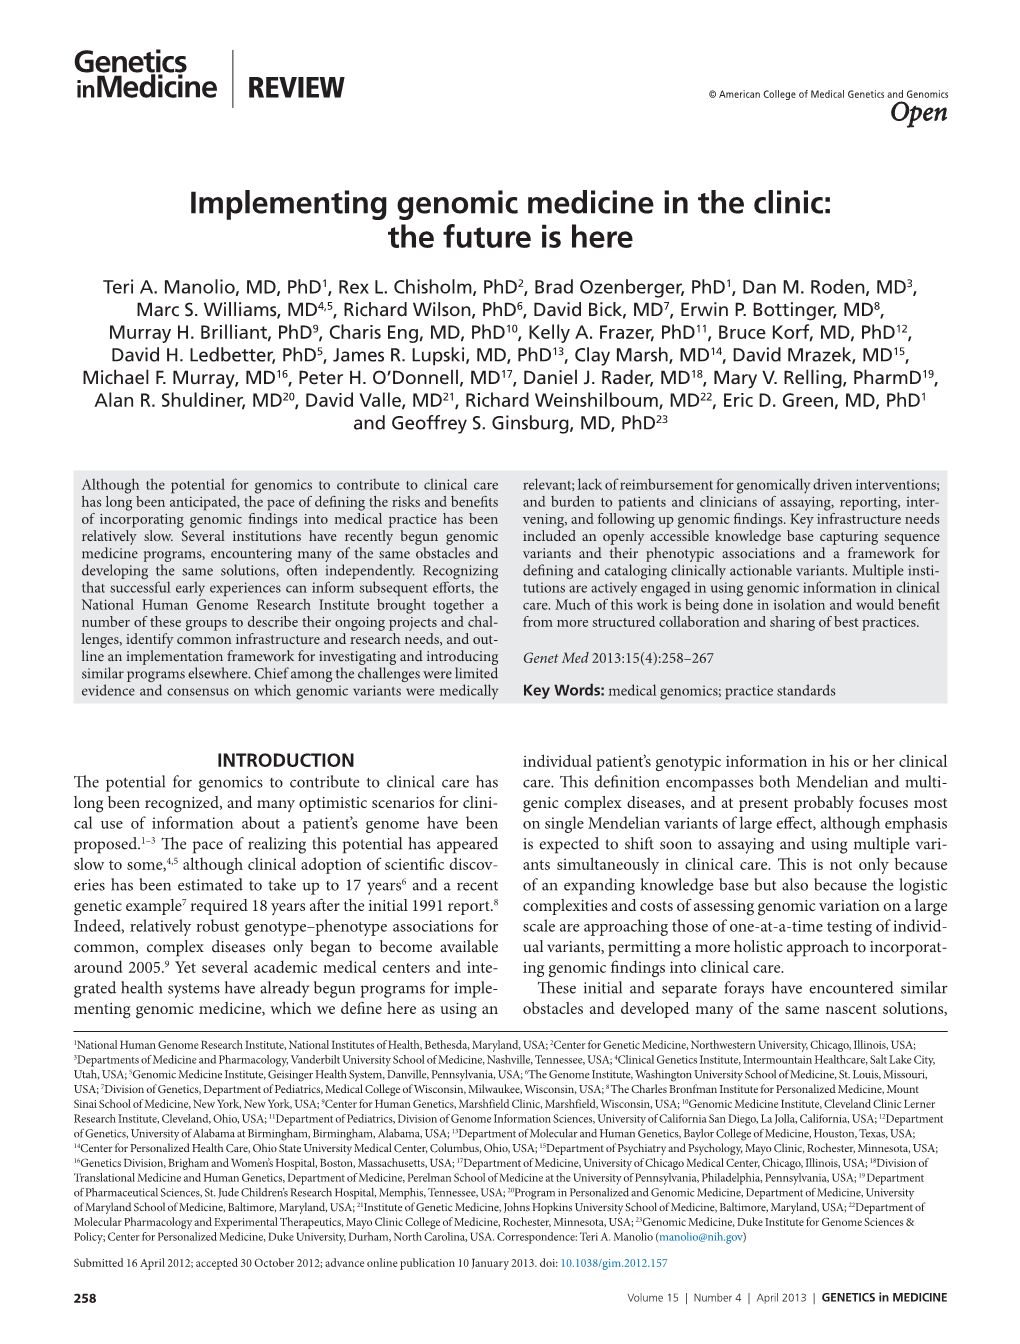 Implementing Genomic Medicine in the Clinic: the Future Is Here